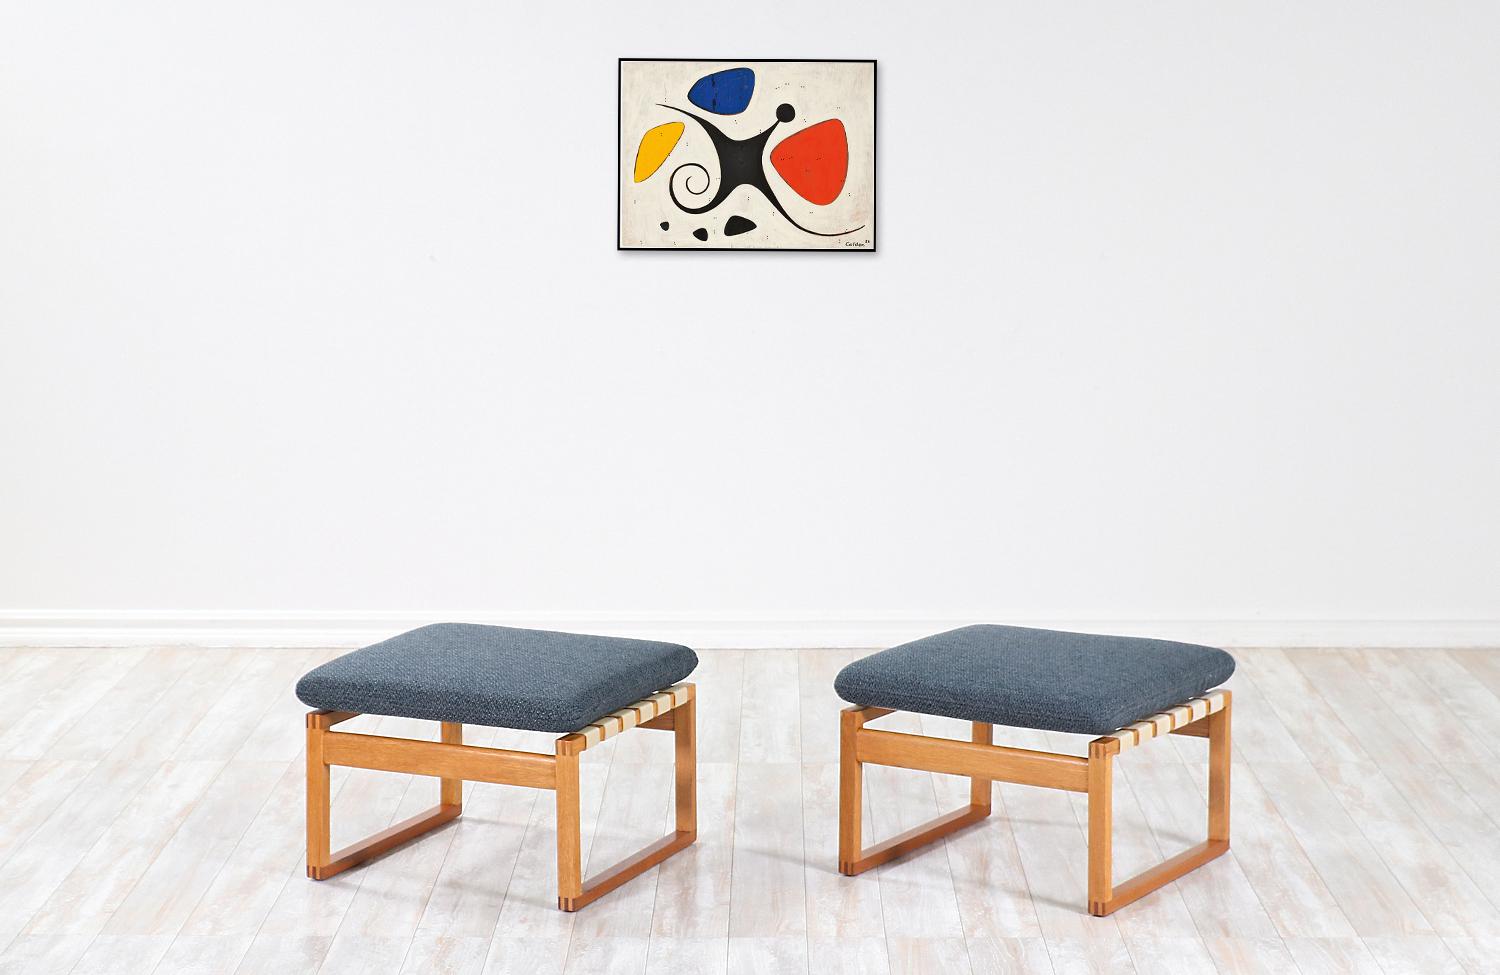 Versatile pair of Model 2248 stools designed by brilliant Danish architect Børge Mogensen in collaboration with the workshop of Fredericia Stolefabrik in Denmark during the 1950s. Mogensen's philosophy for this line was servicing functionalism and